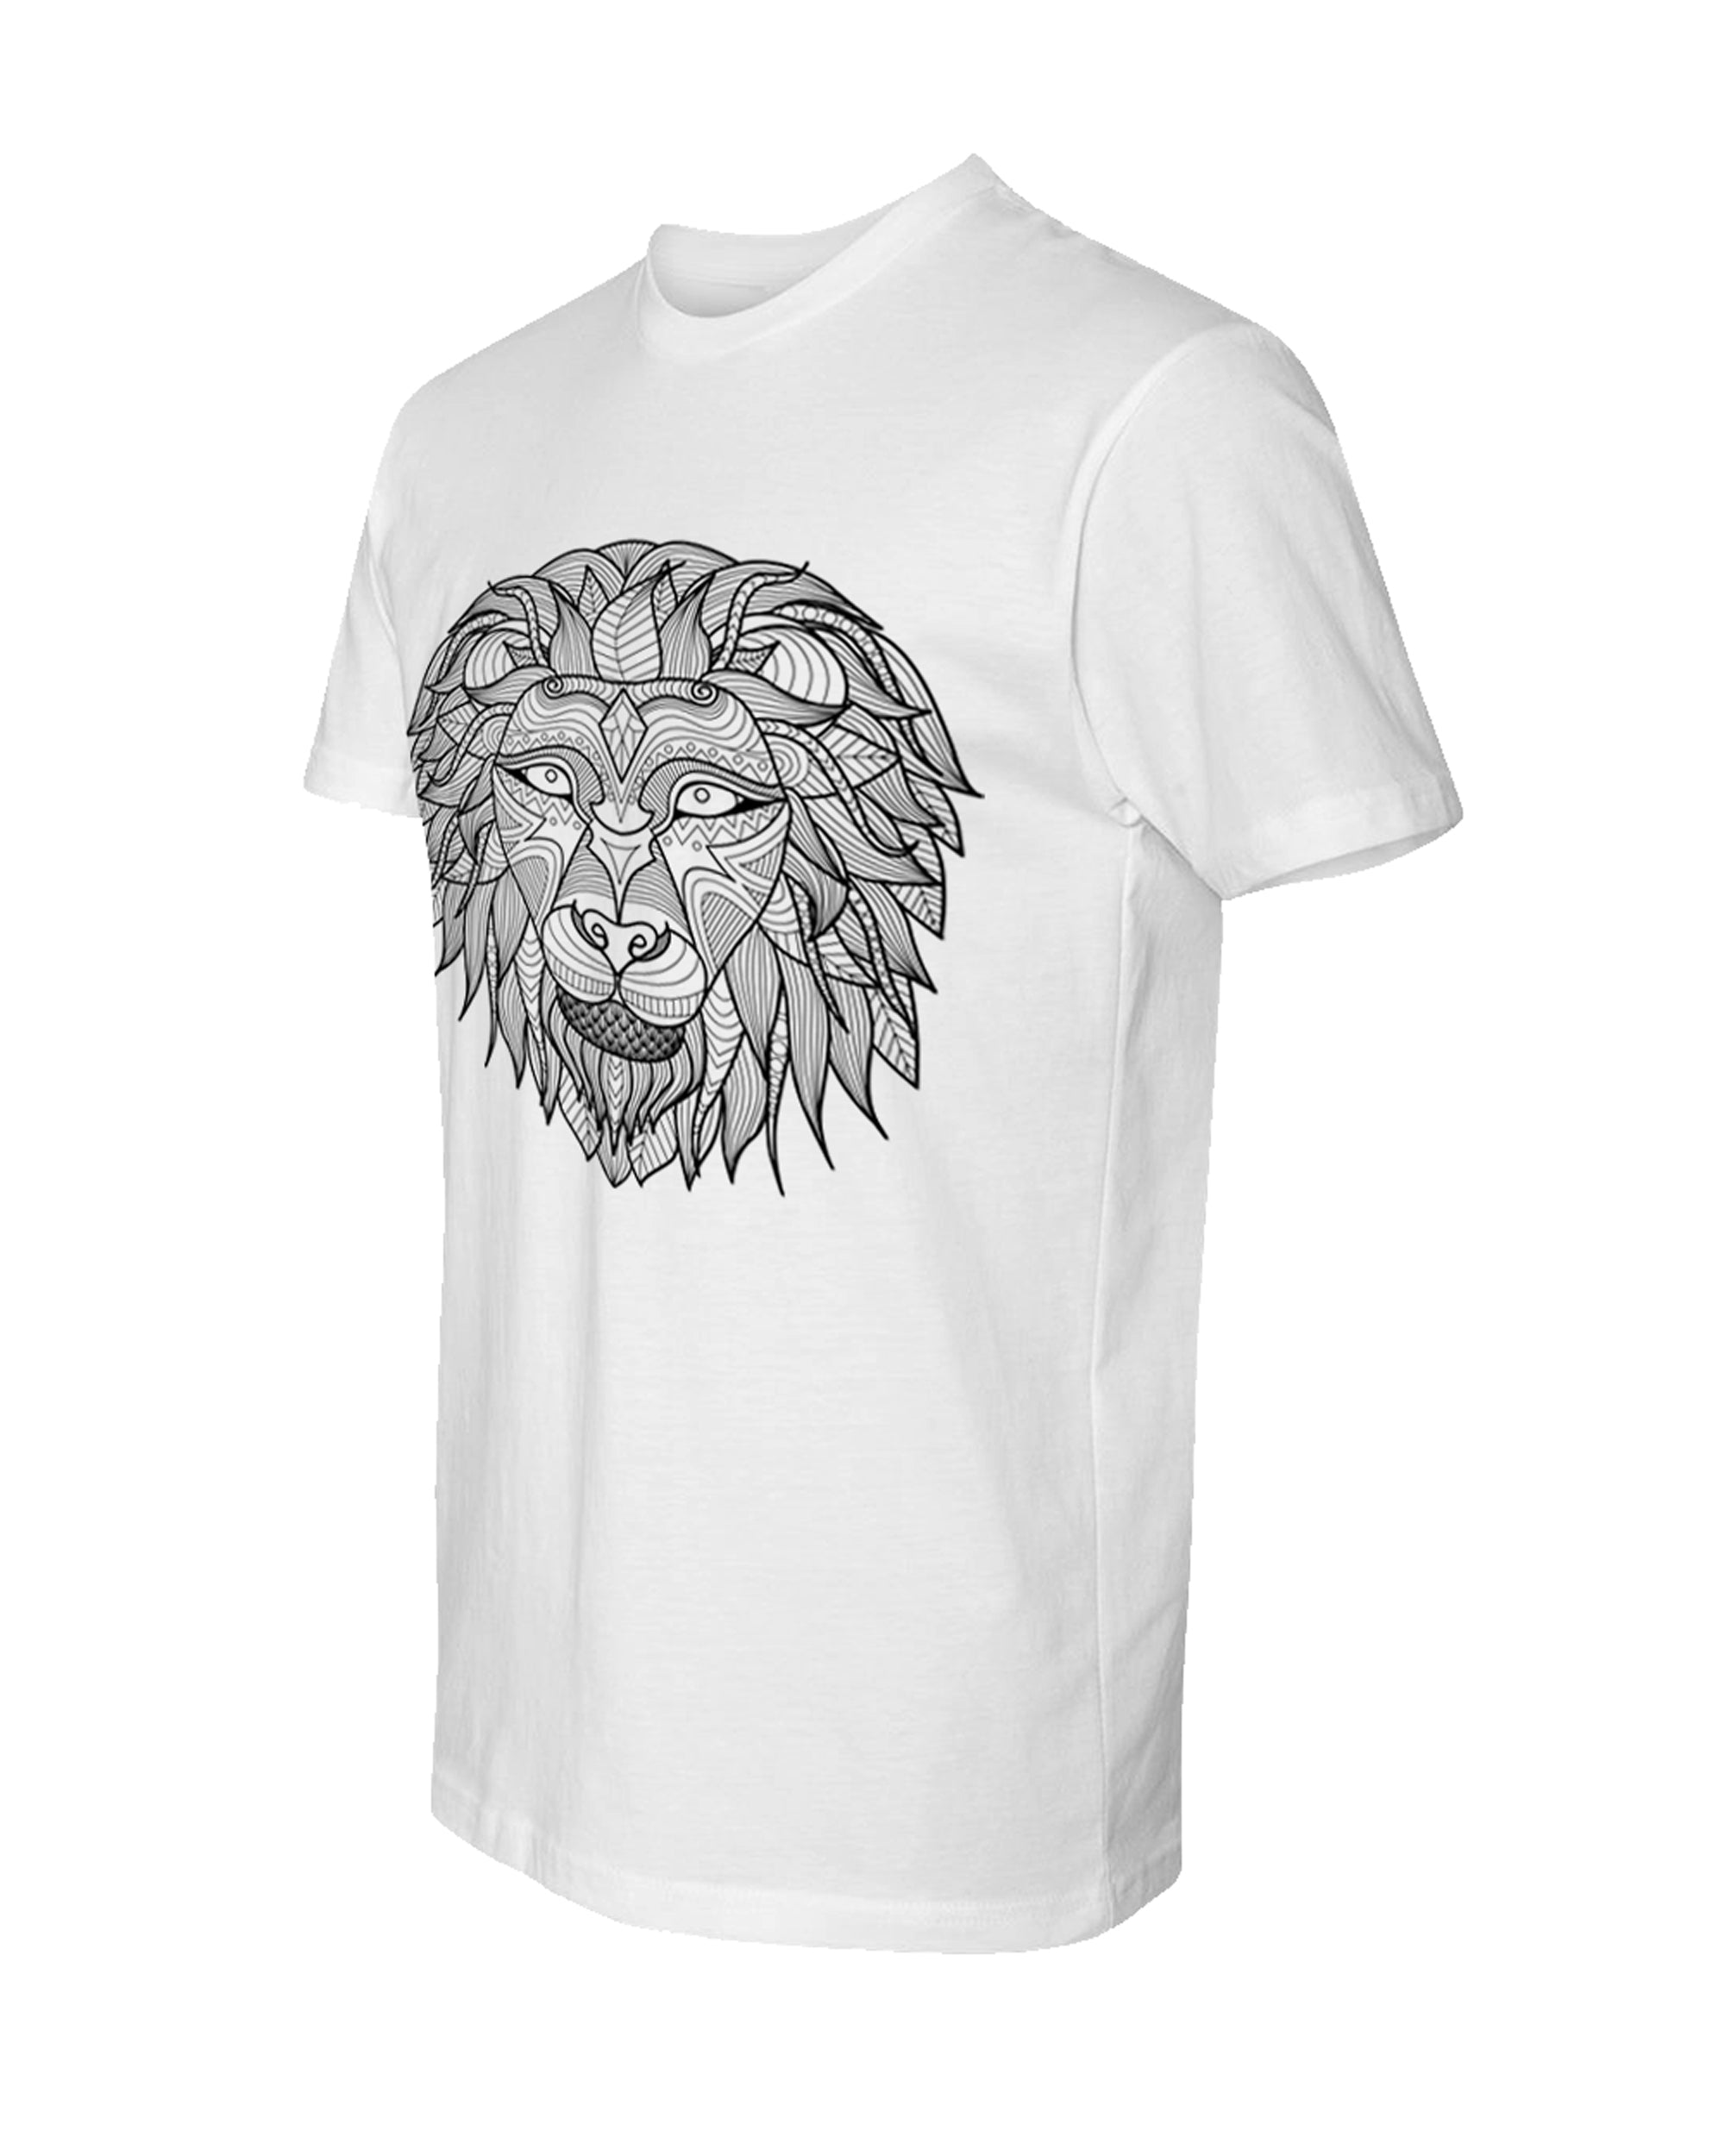 Men’s Coloring Lion White T Shirt - Adorned By You